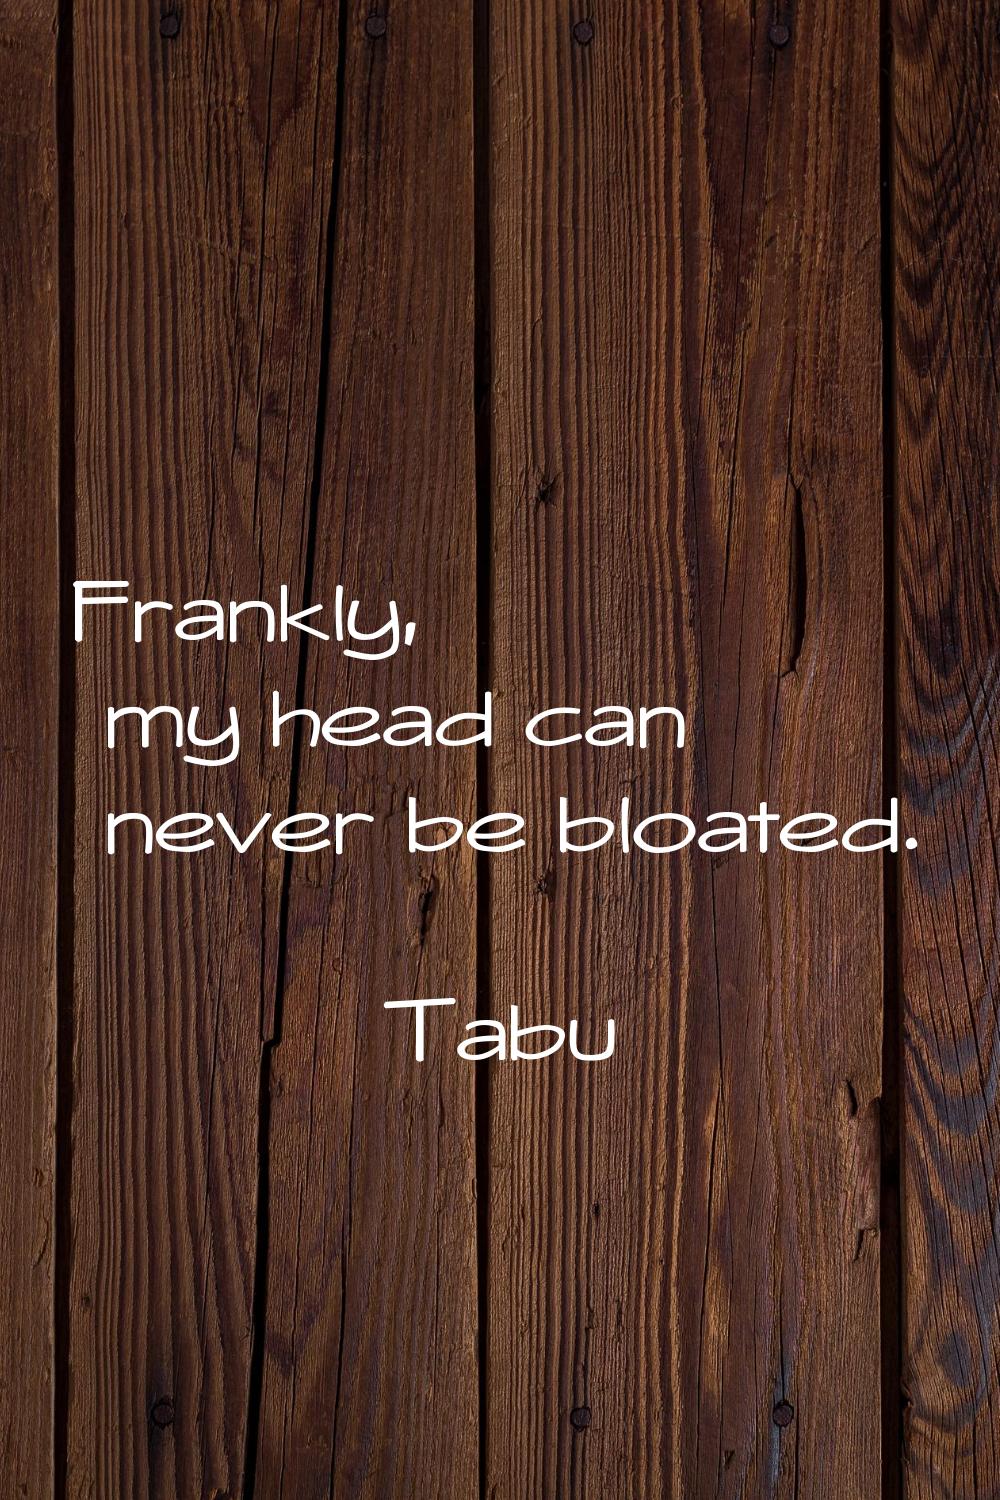 Frankly, my head can never be bloated.